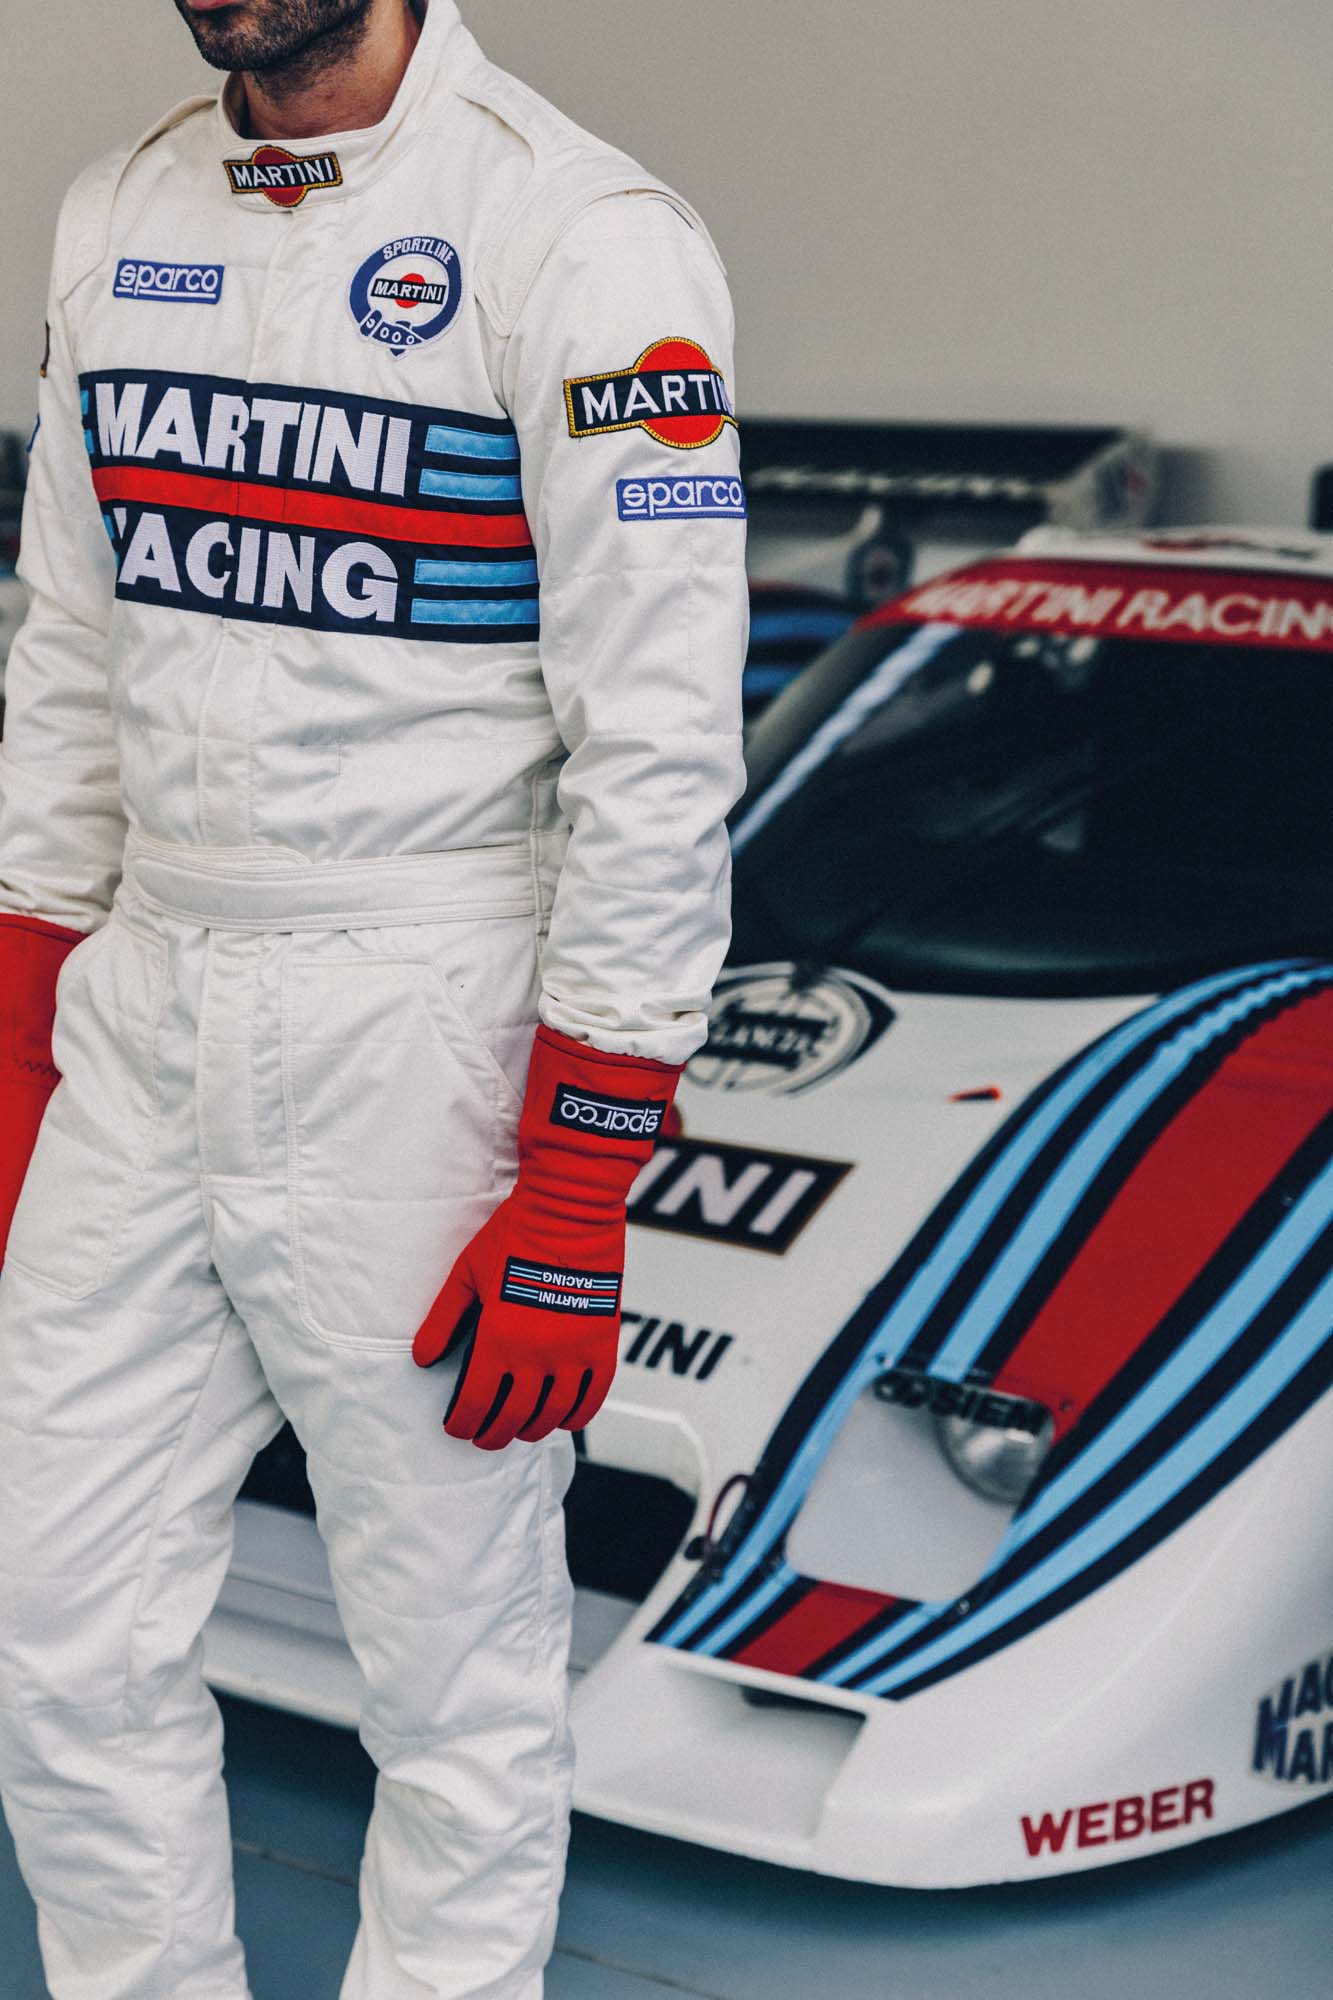 Sparco Martini Competition Racing Suit